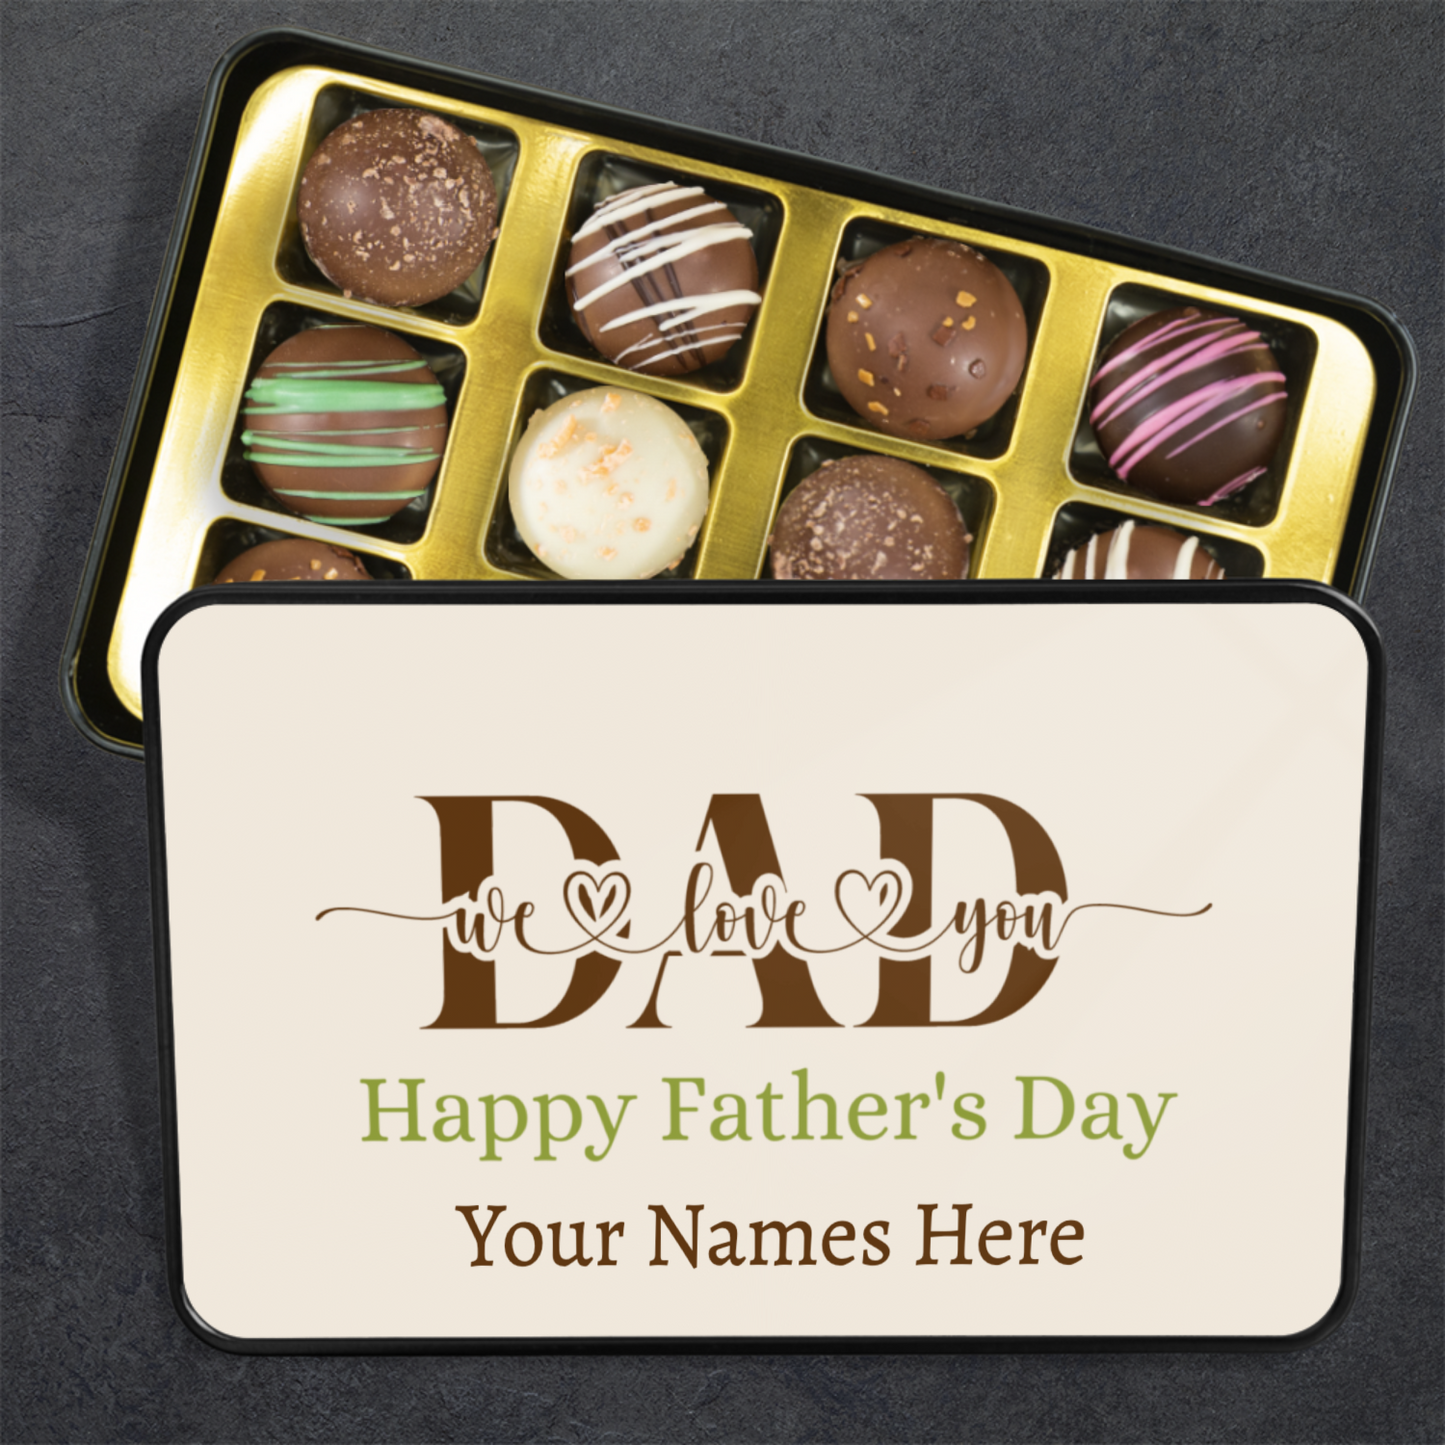 Personalized Father's Day Chocolate Truffles